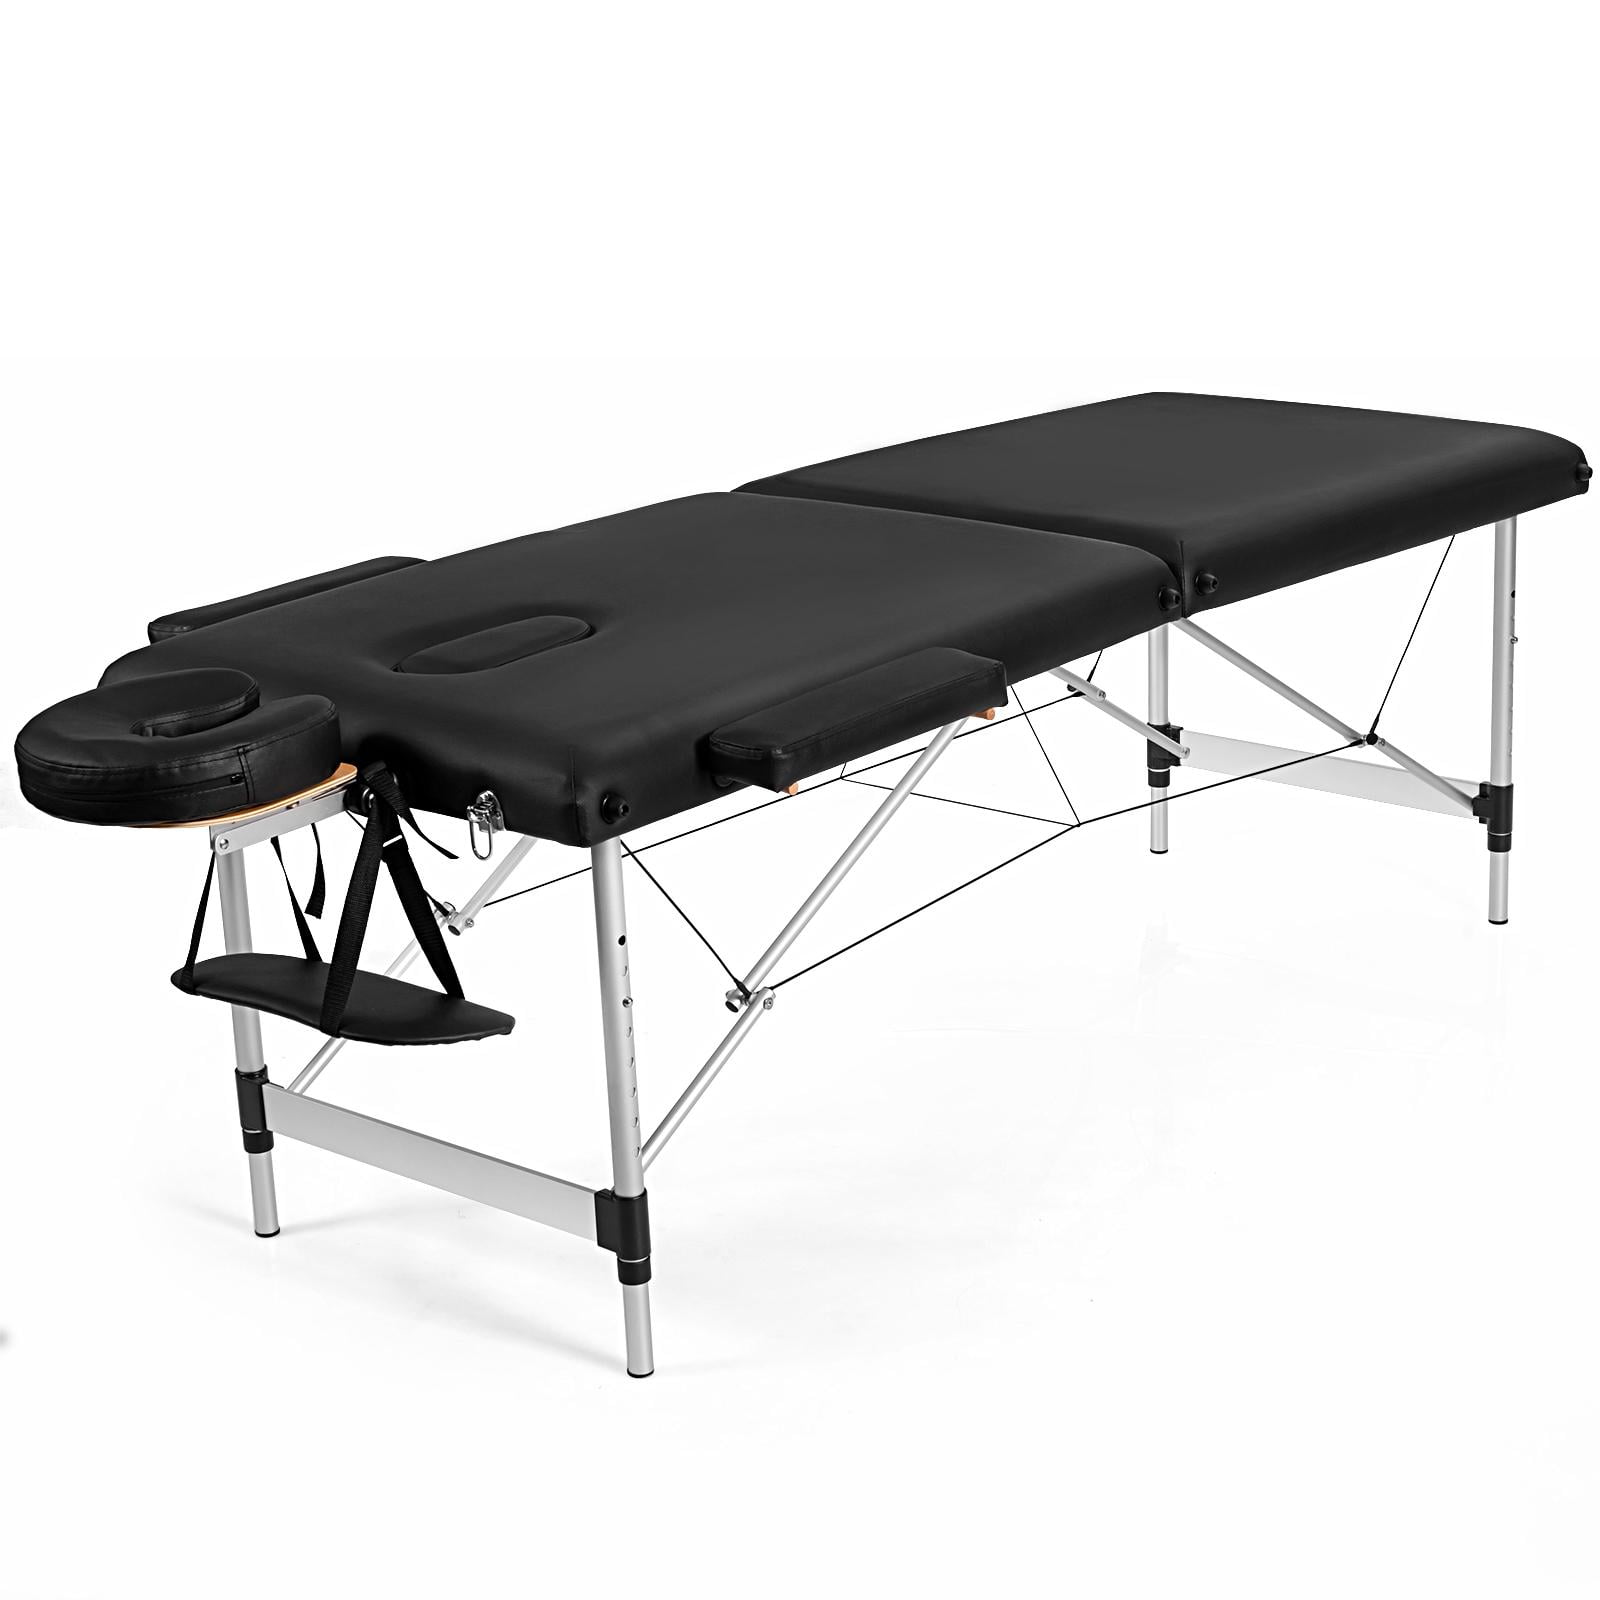  Giantex 84 Massage Table Professional Portable Lash Bed, 2  Folding Lightweight Massage Bed, Aluminum Frame, Height Adjustable, Face  Cradle & Side Armrests, Salon Spa Tattoo Bed with Carry Case : Beauty